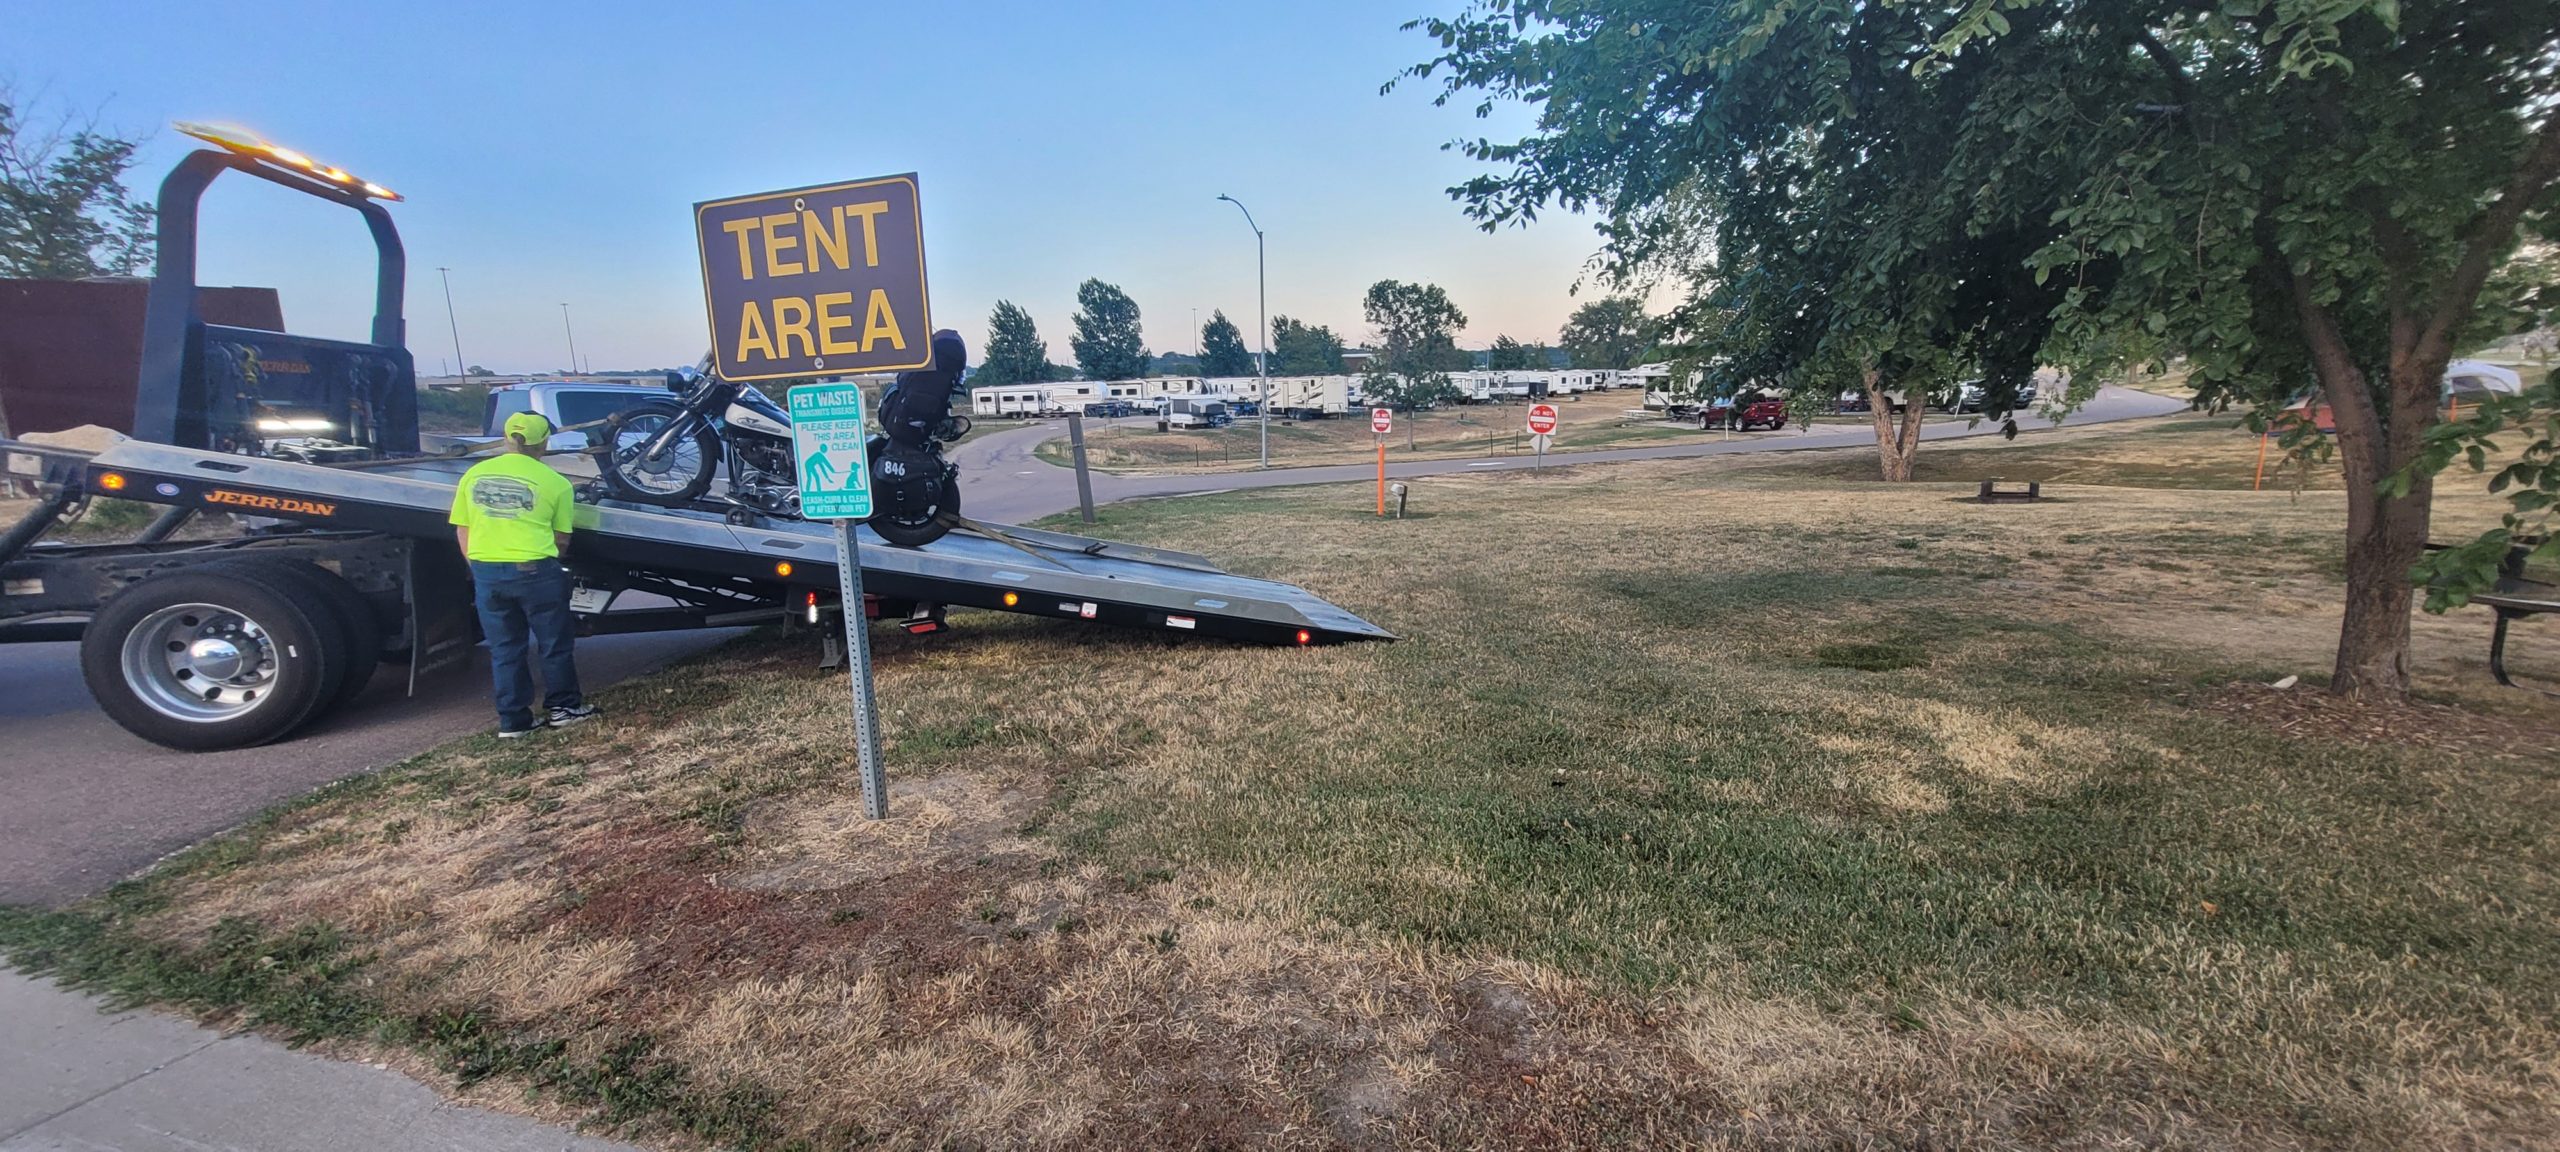 Campsite in Sioux City after breakdown